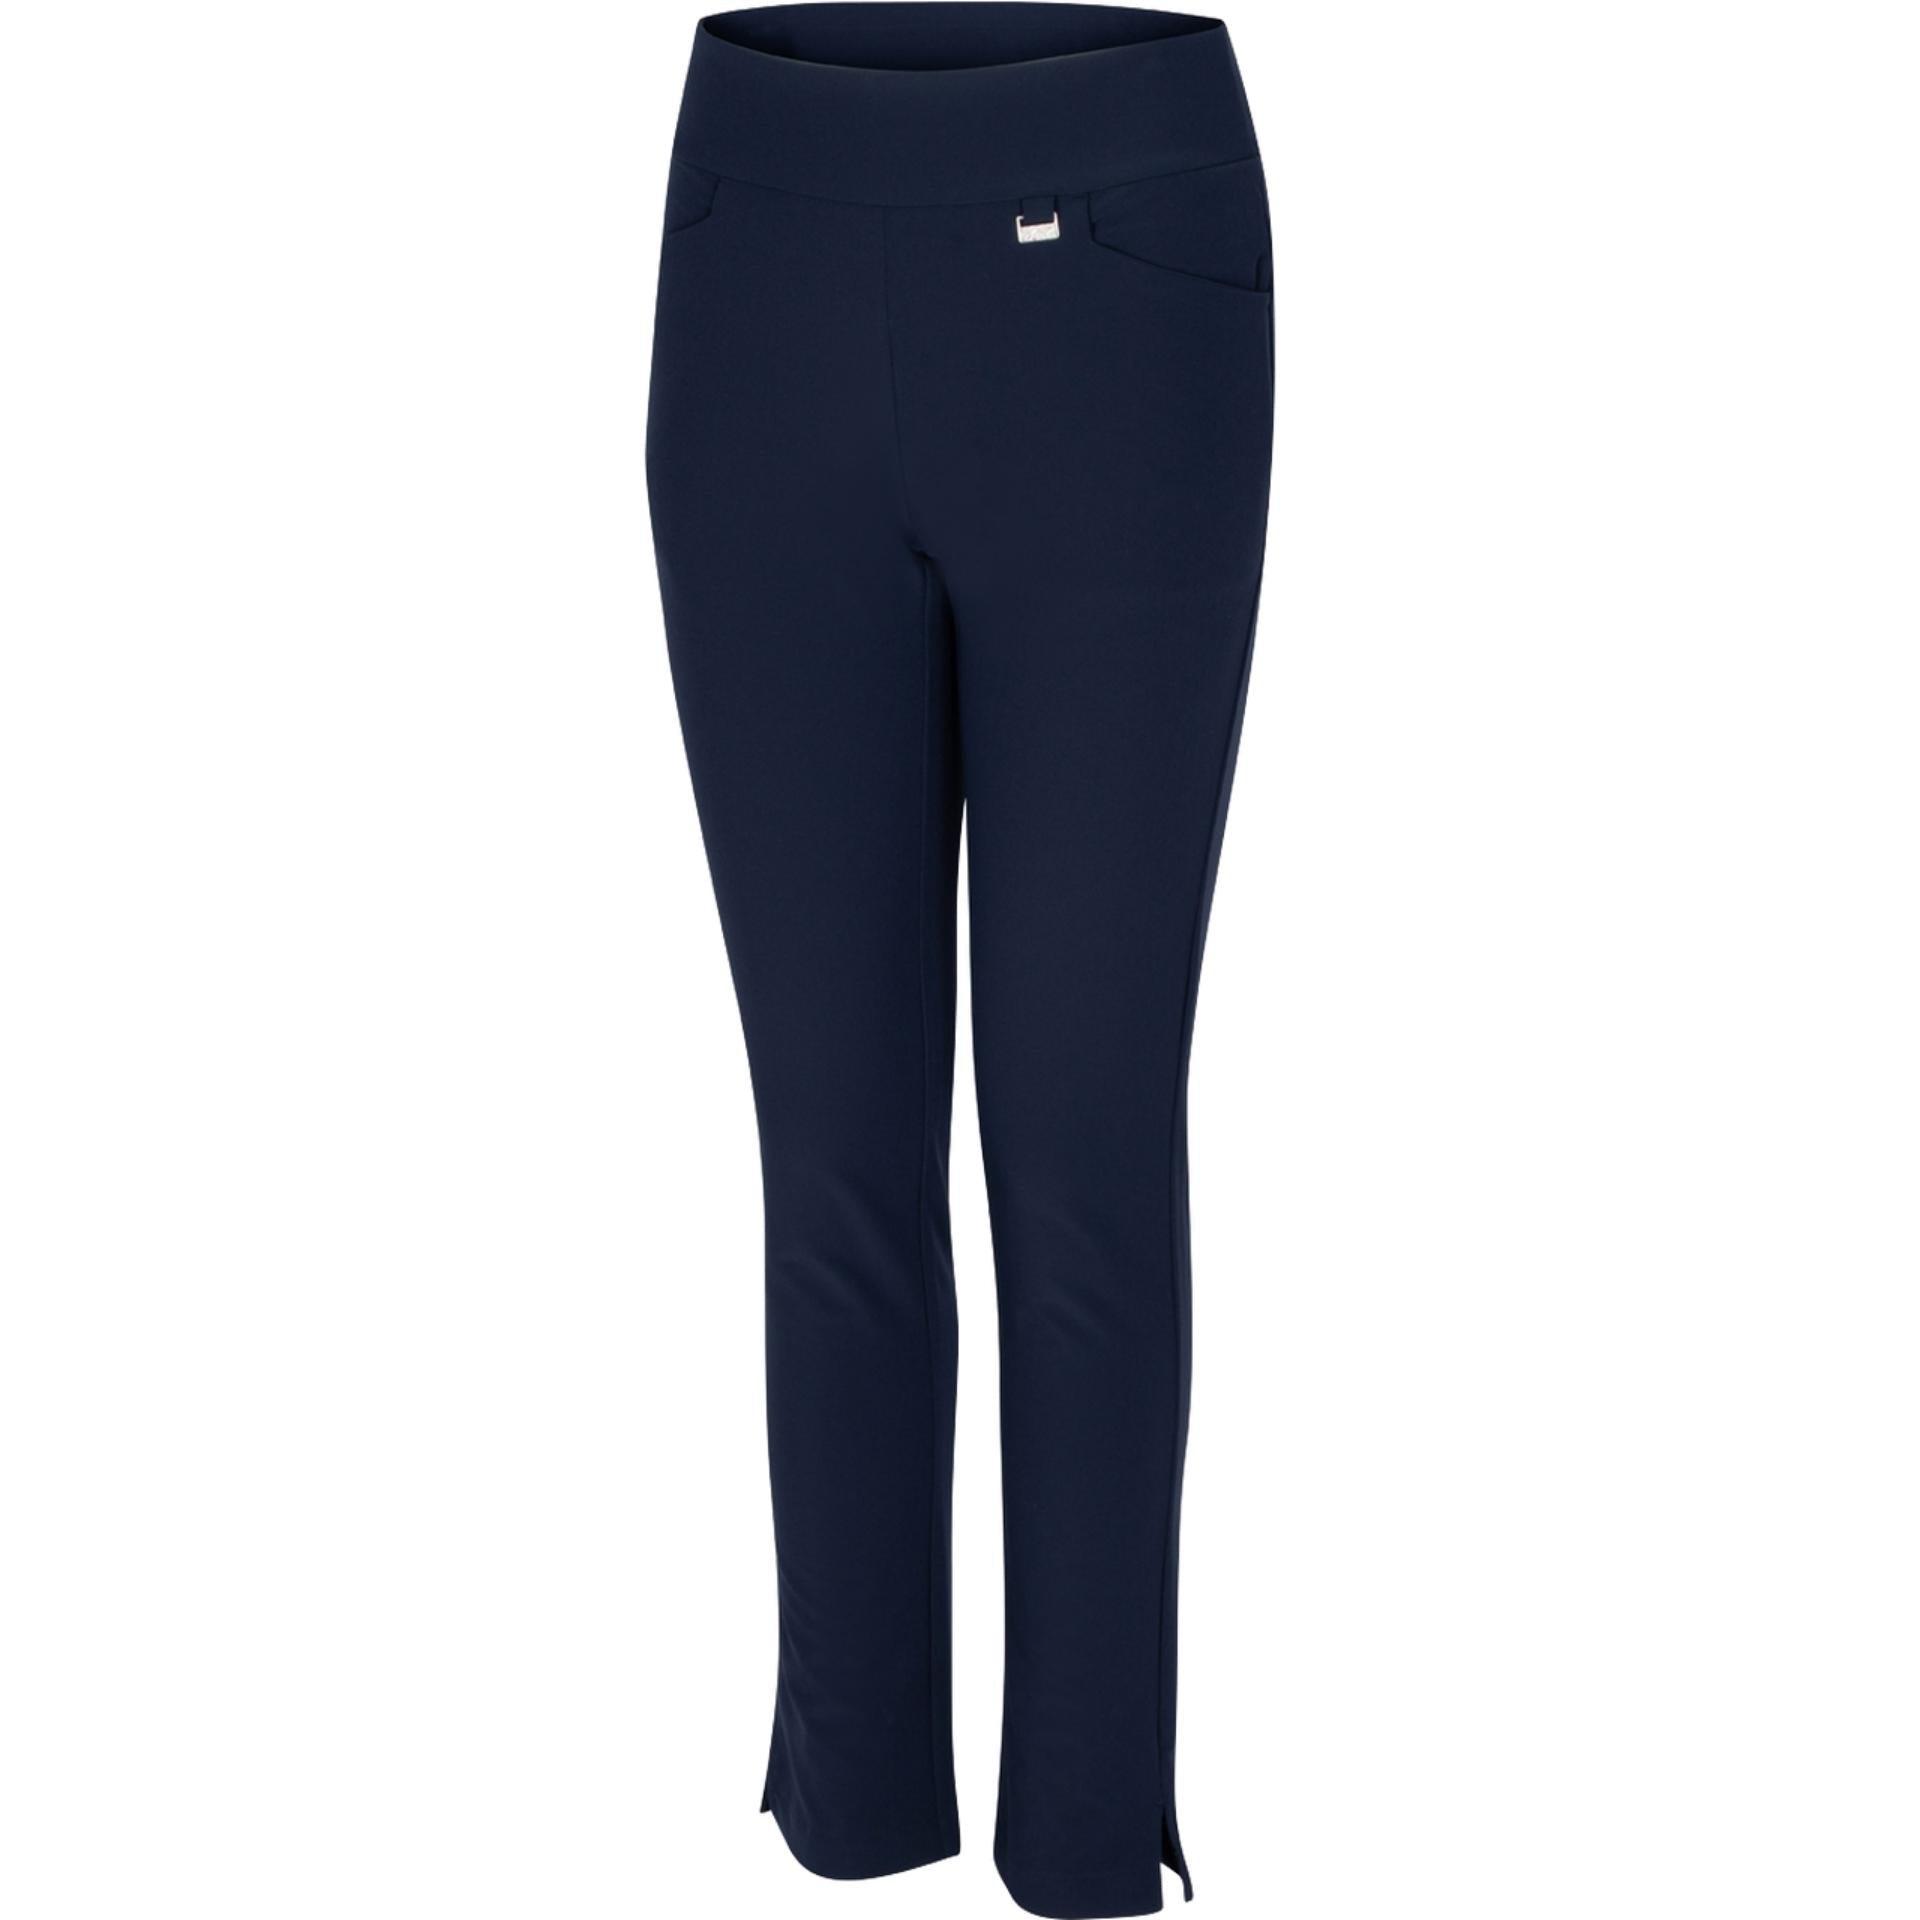 Greg Norman Women's Essential Pull-On Stretch Pants 2022